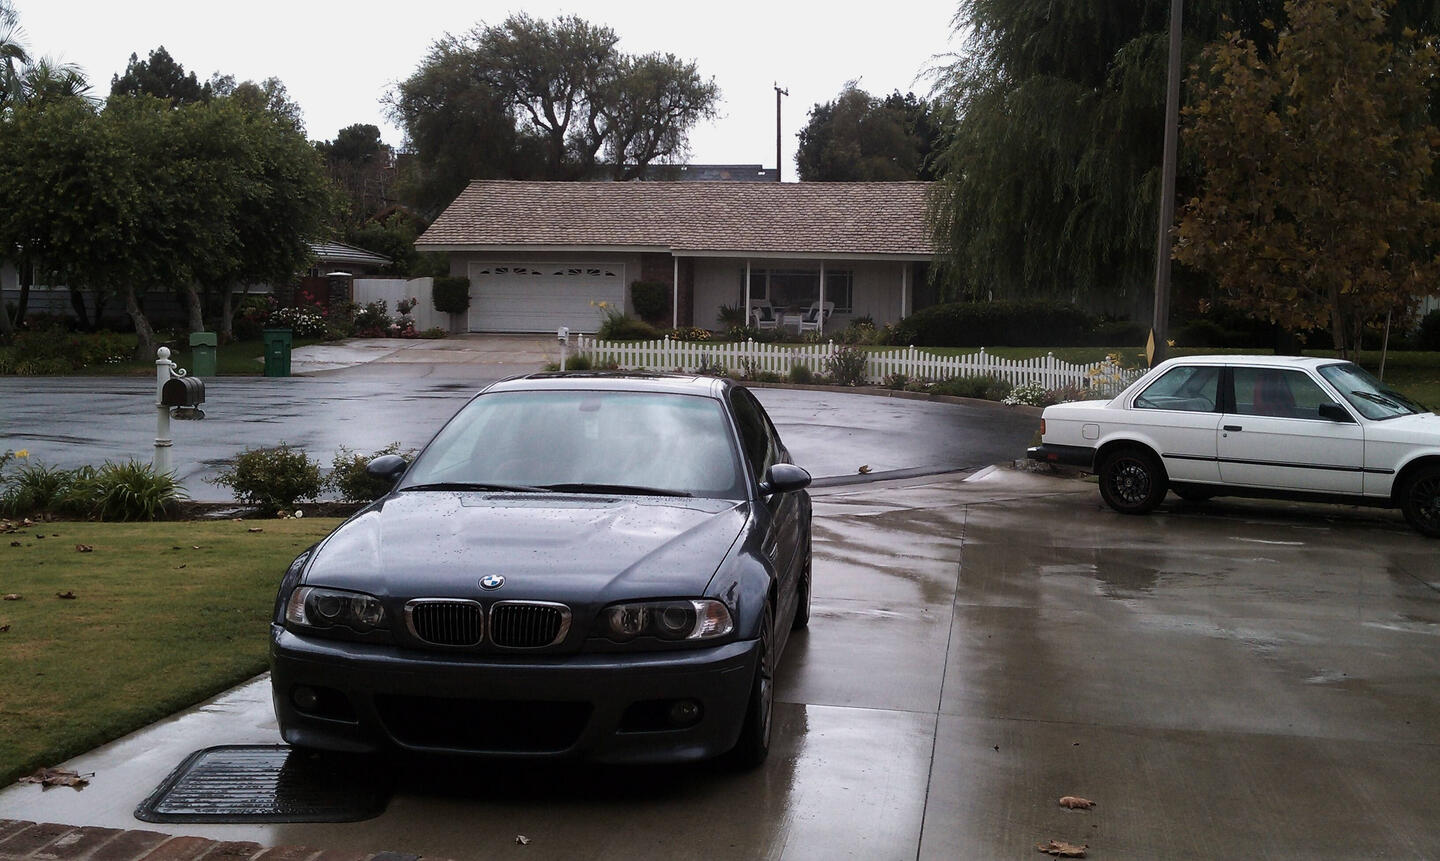 This E46 M3 Sedan Conversion Reminds Us Of The Other M3 BMW Refused To  Build